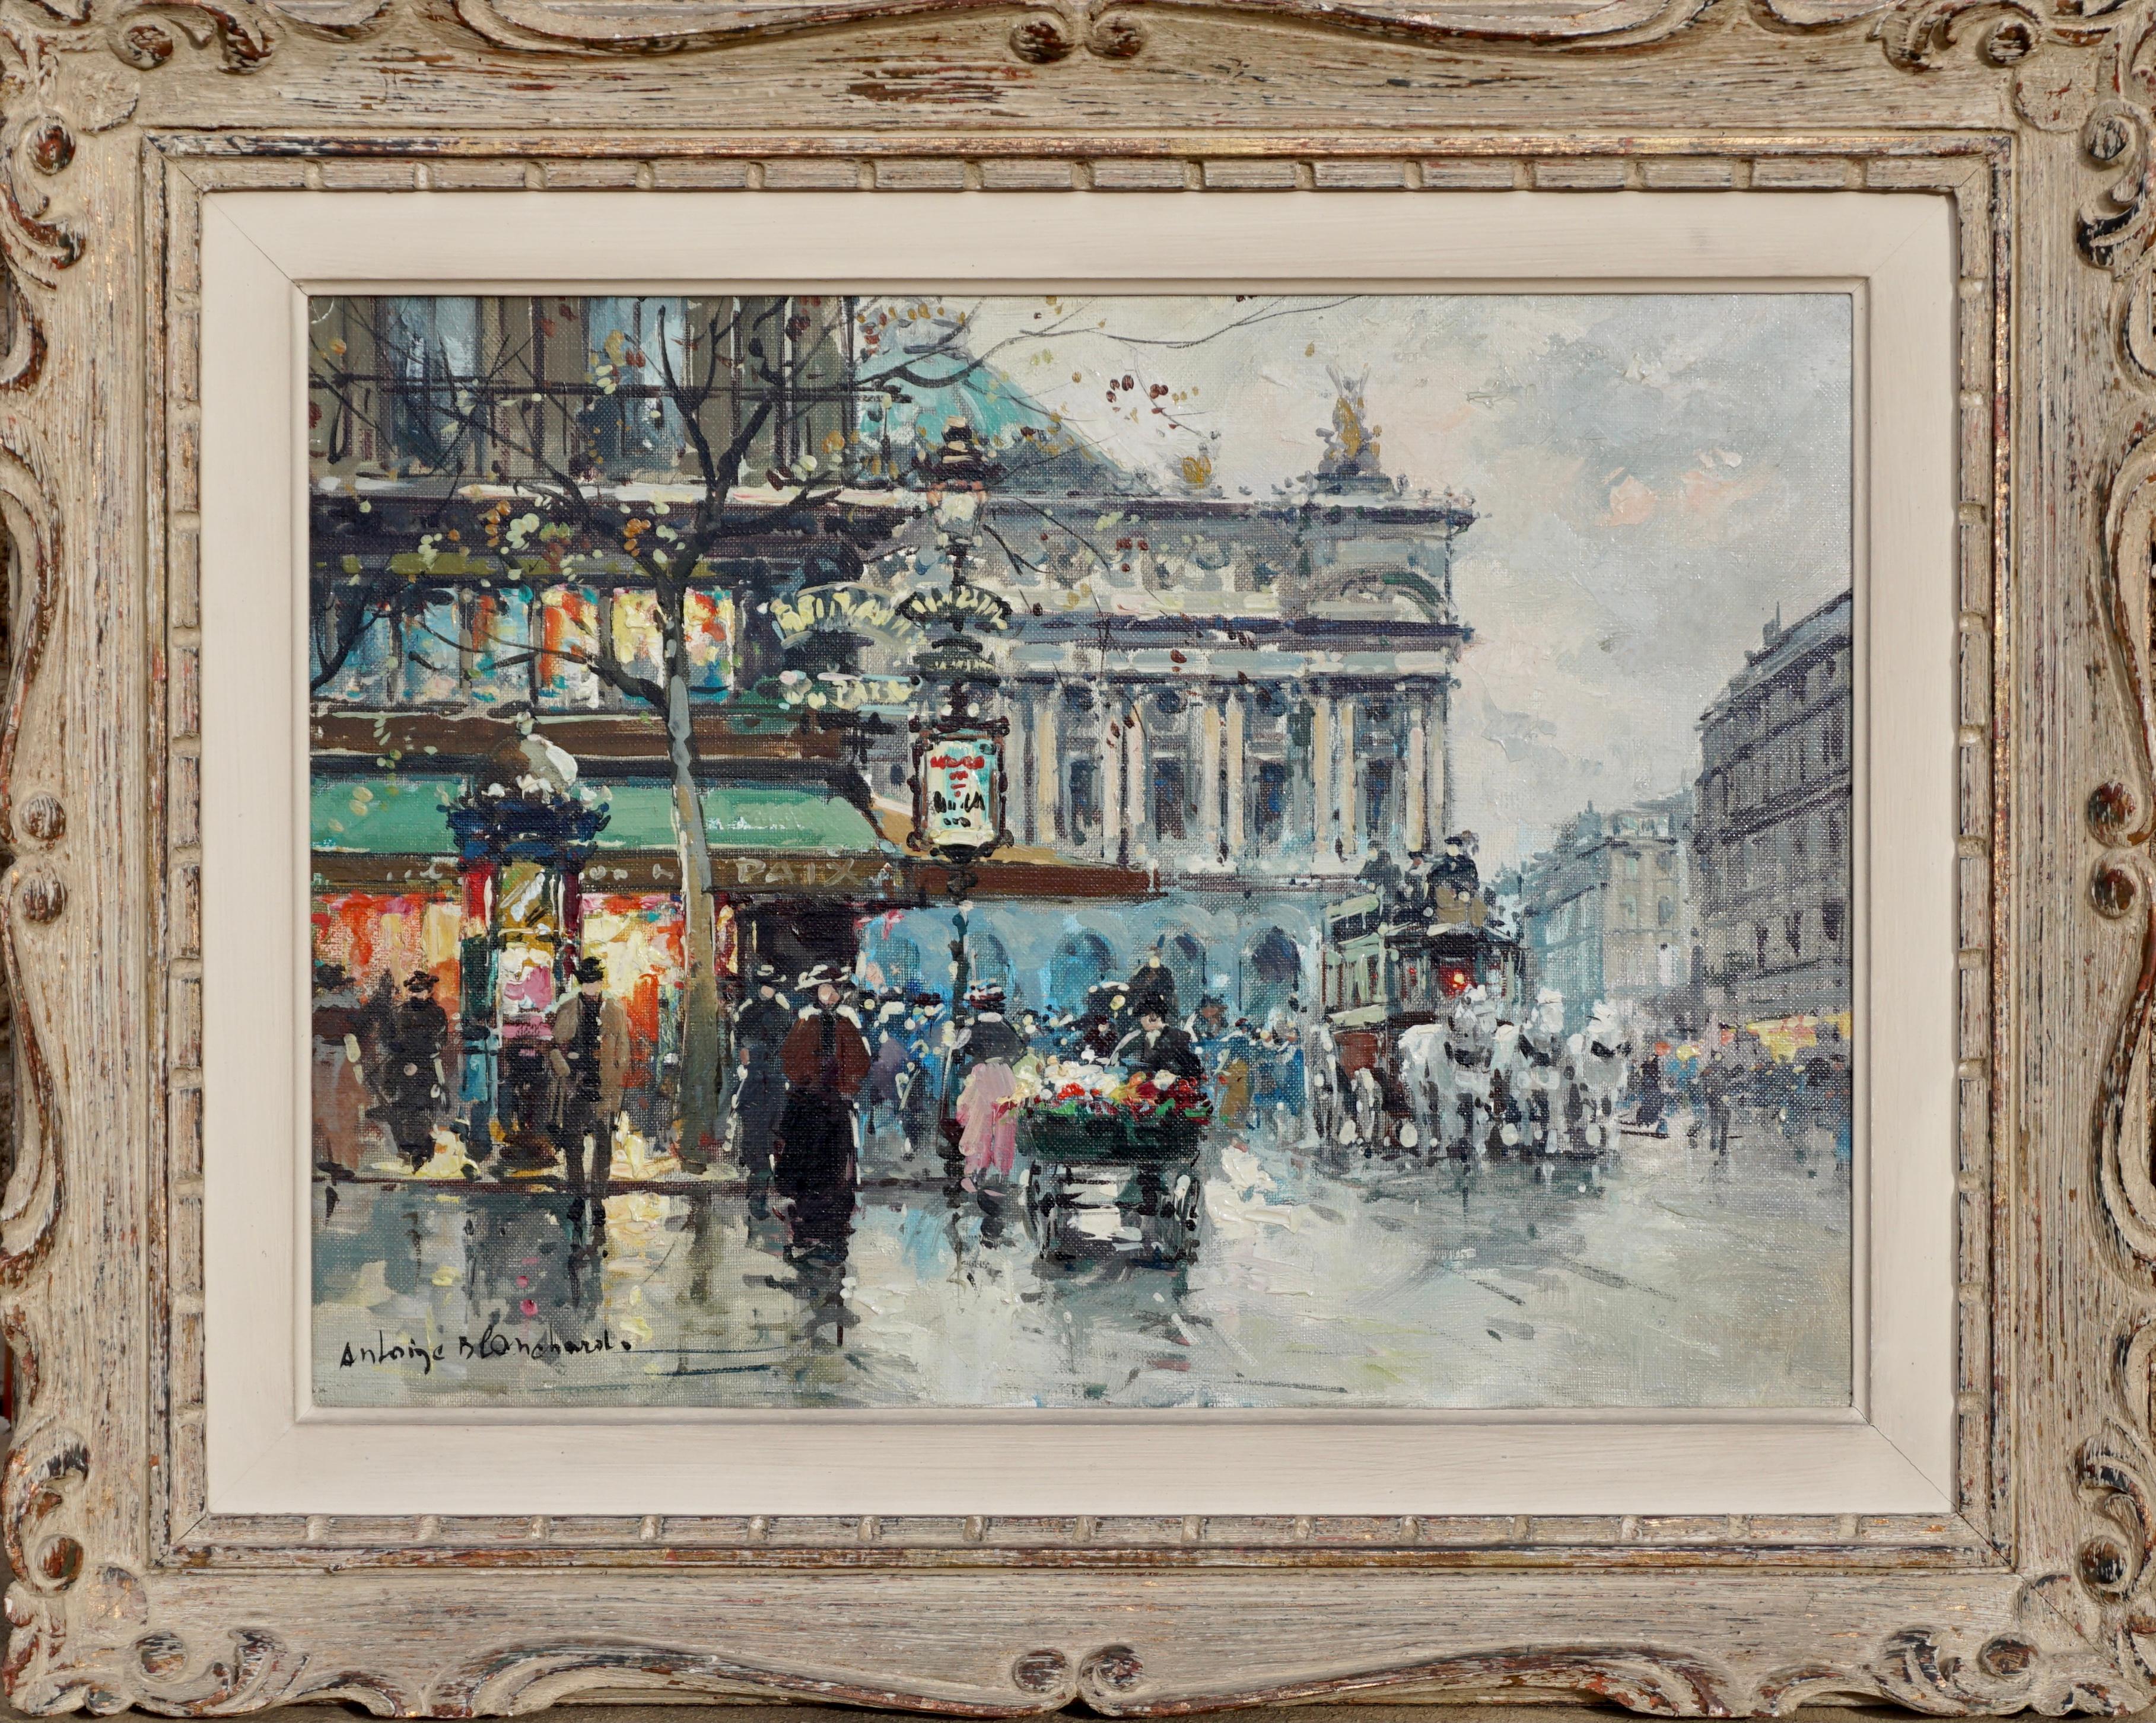 Antoine Blanchard (1910 - 1988) Cafe de la Paix. Circa 1950 wonderful and vibrant scene from the Grand Boulevards of Paris under the rain in fall. You can hear the horses prancing and carriages on the cobblestone streets. You can smell the fresh